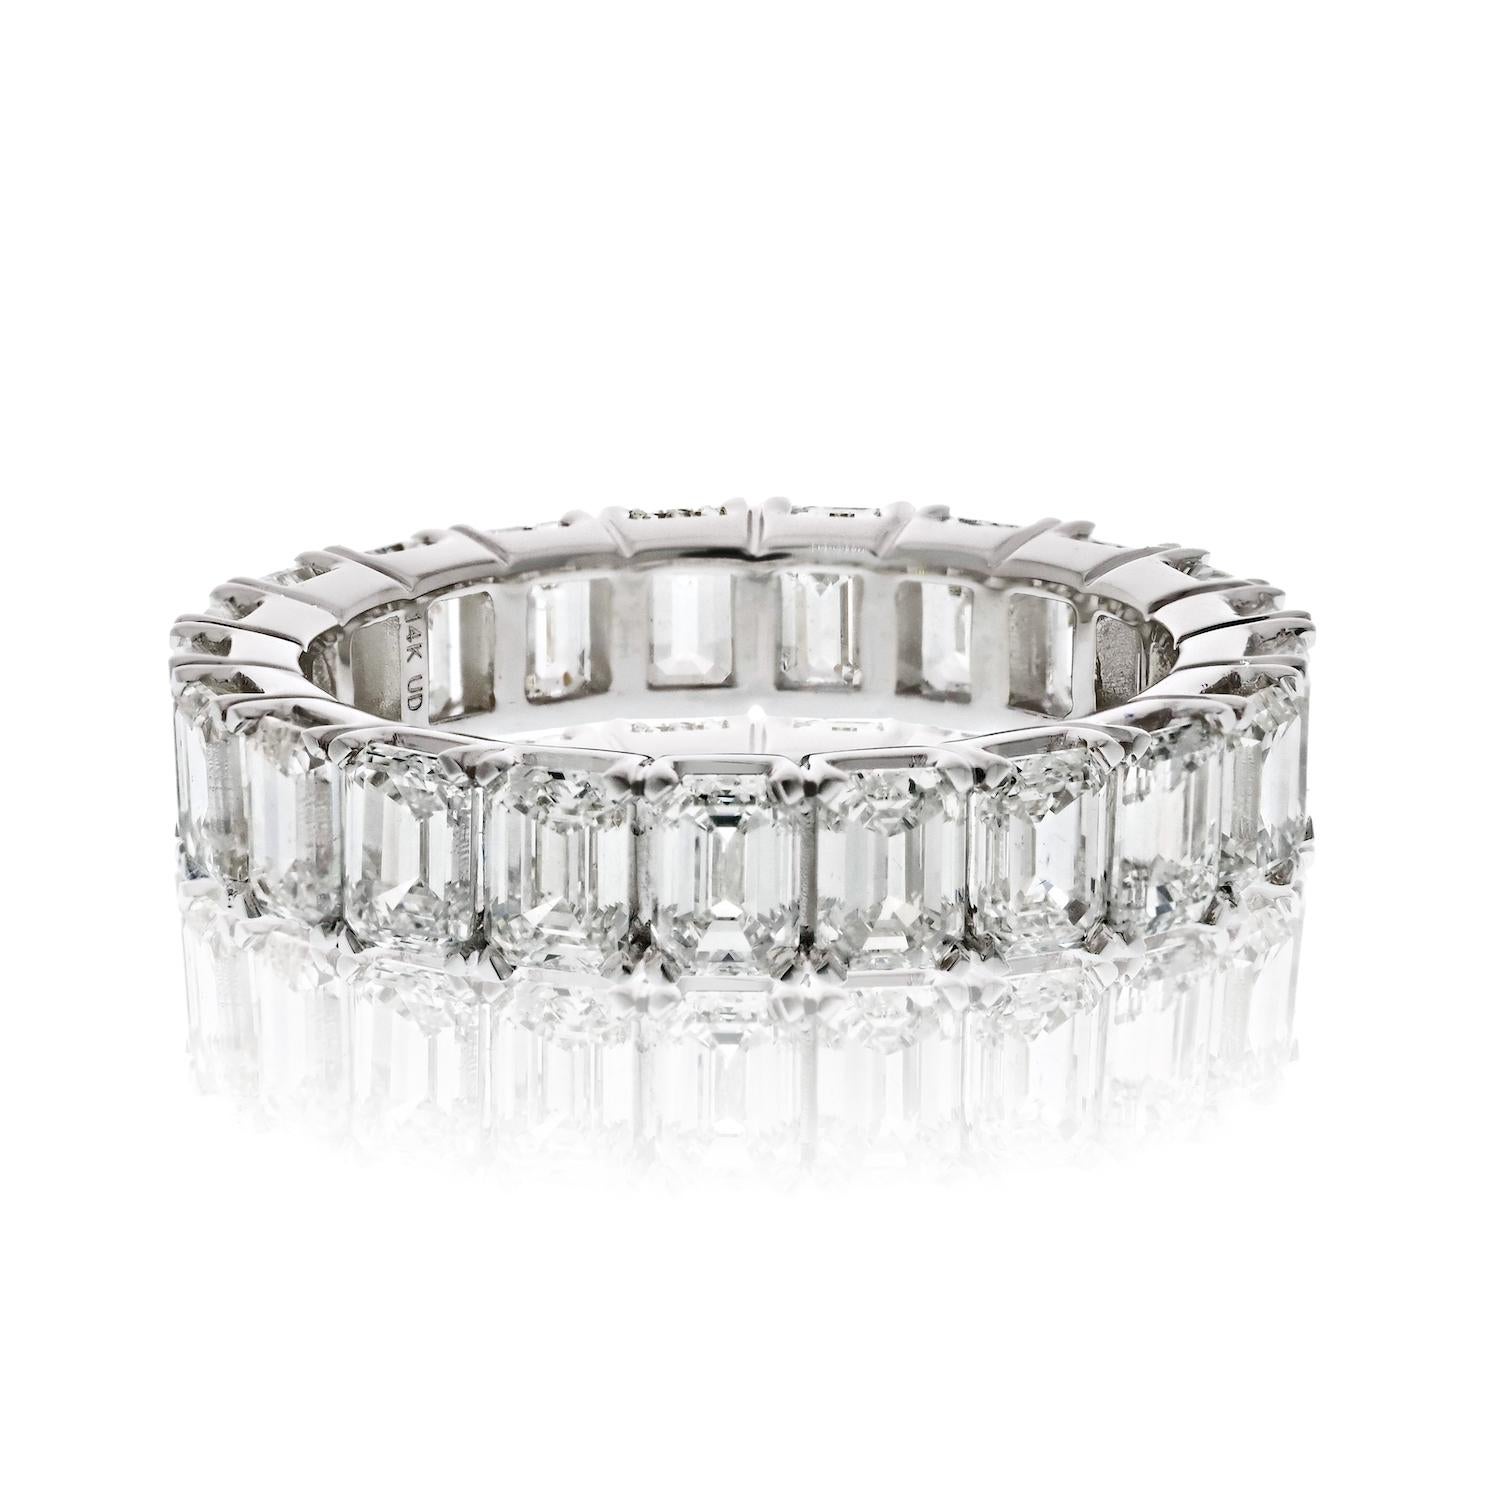 14K White Gold 5.00cttw Emerald Cut Diamond Eternity Eternity Band In Excellent Condition For Sale In New York, NY